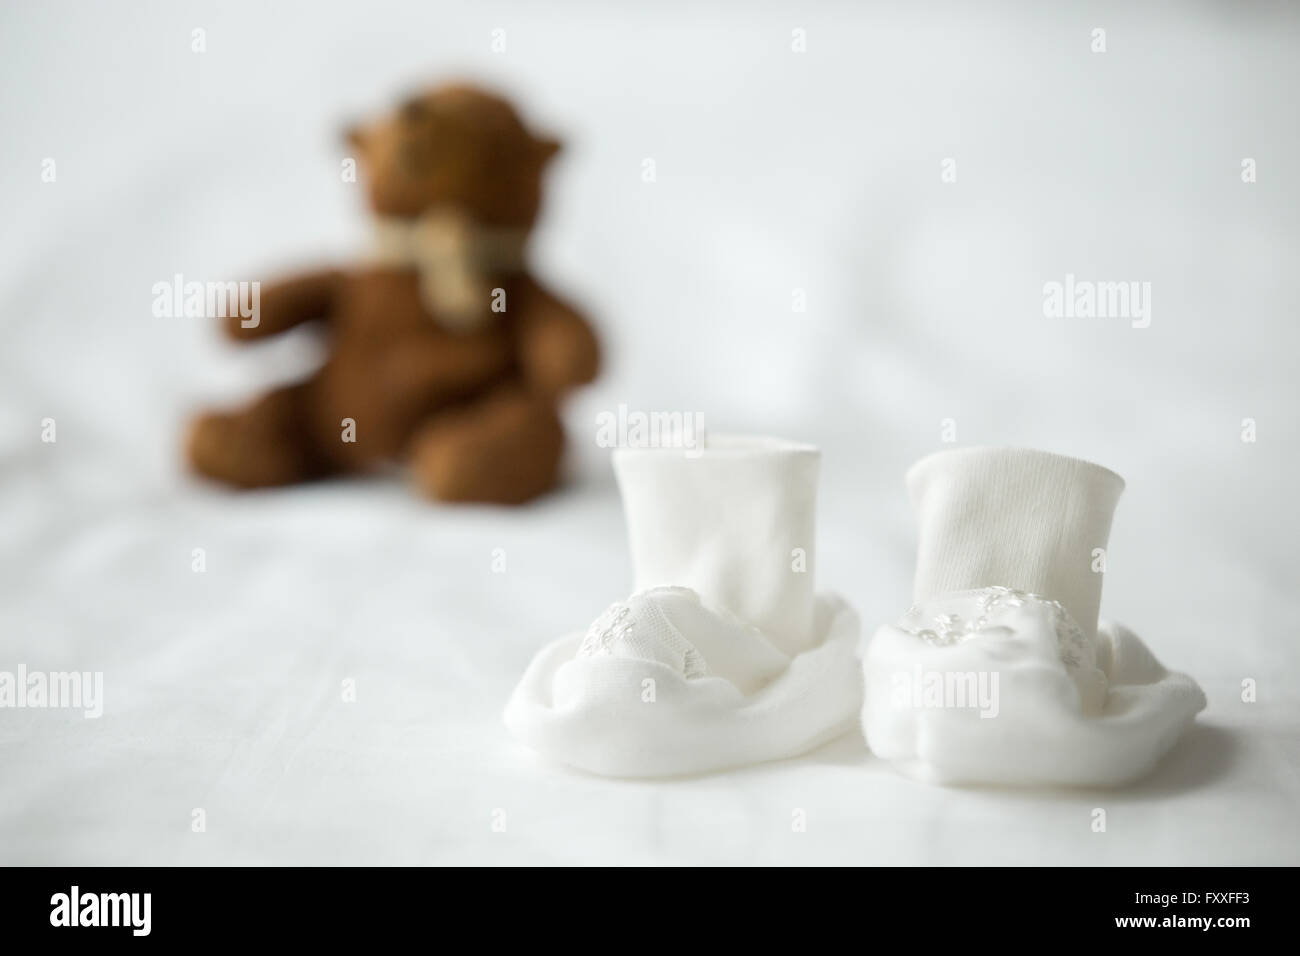 Close-up of white tiny booties for newborn baby on the bed. Cute teddy bear on the background. Maternity concept Stock Photo